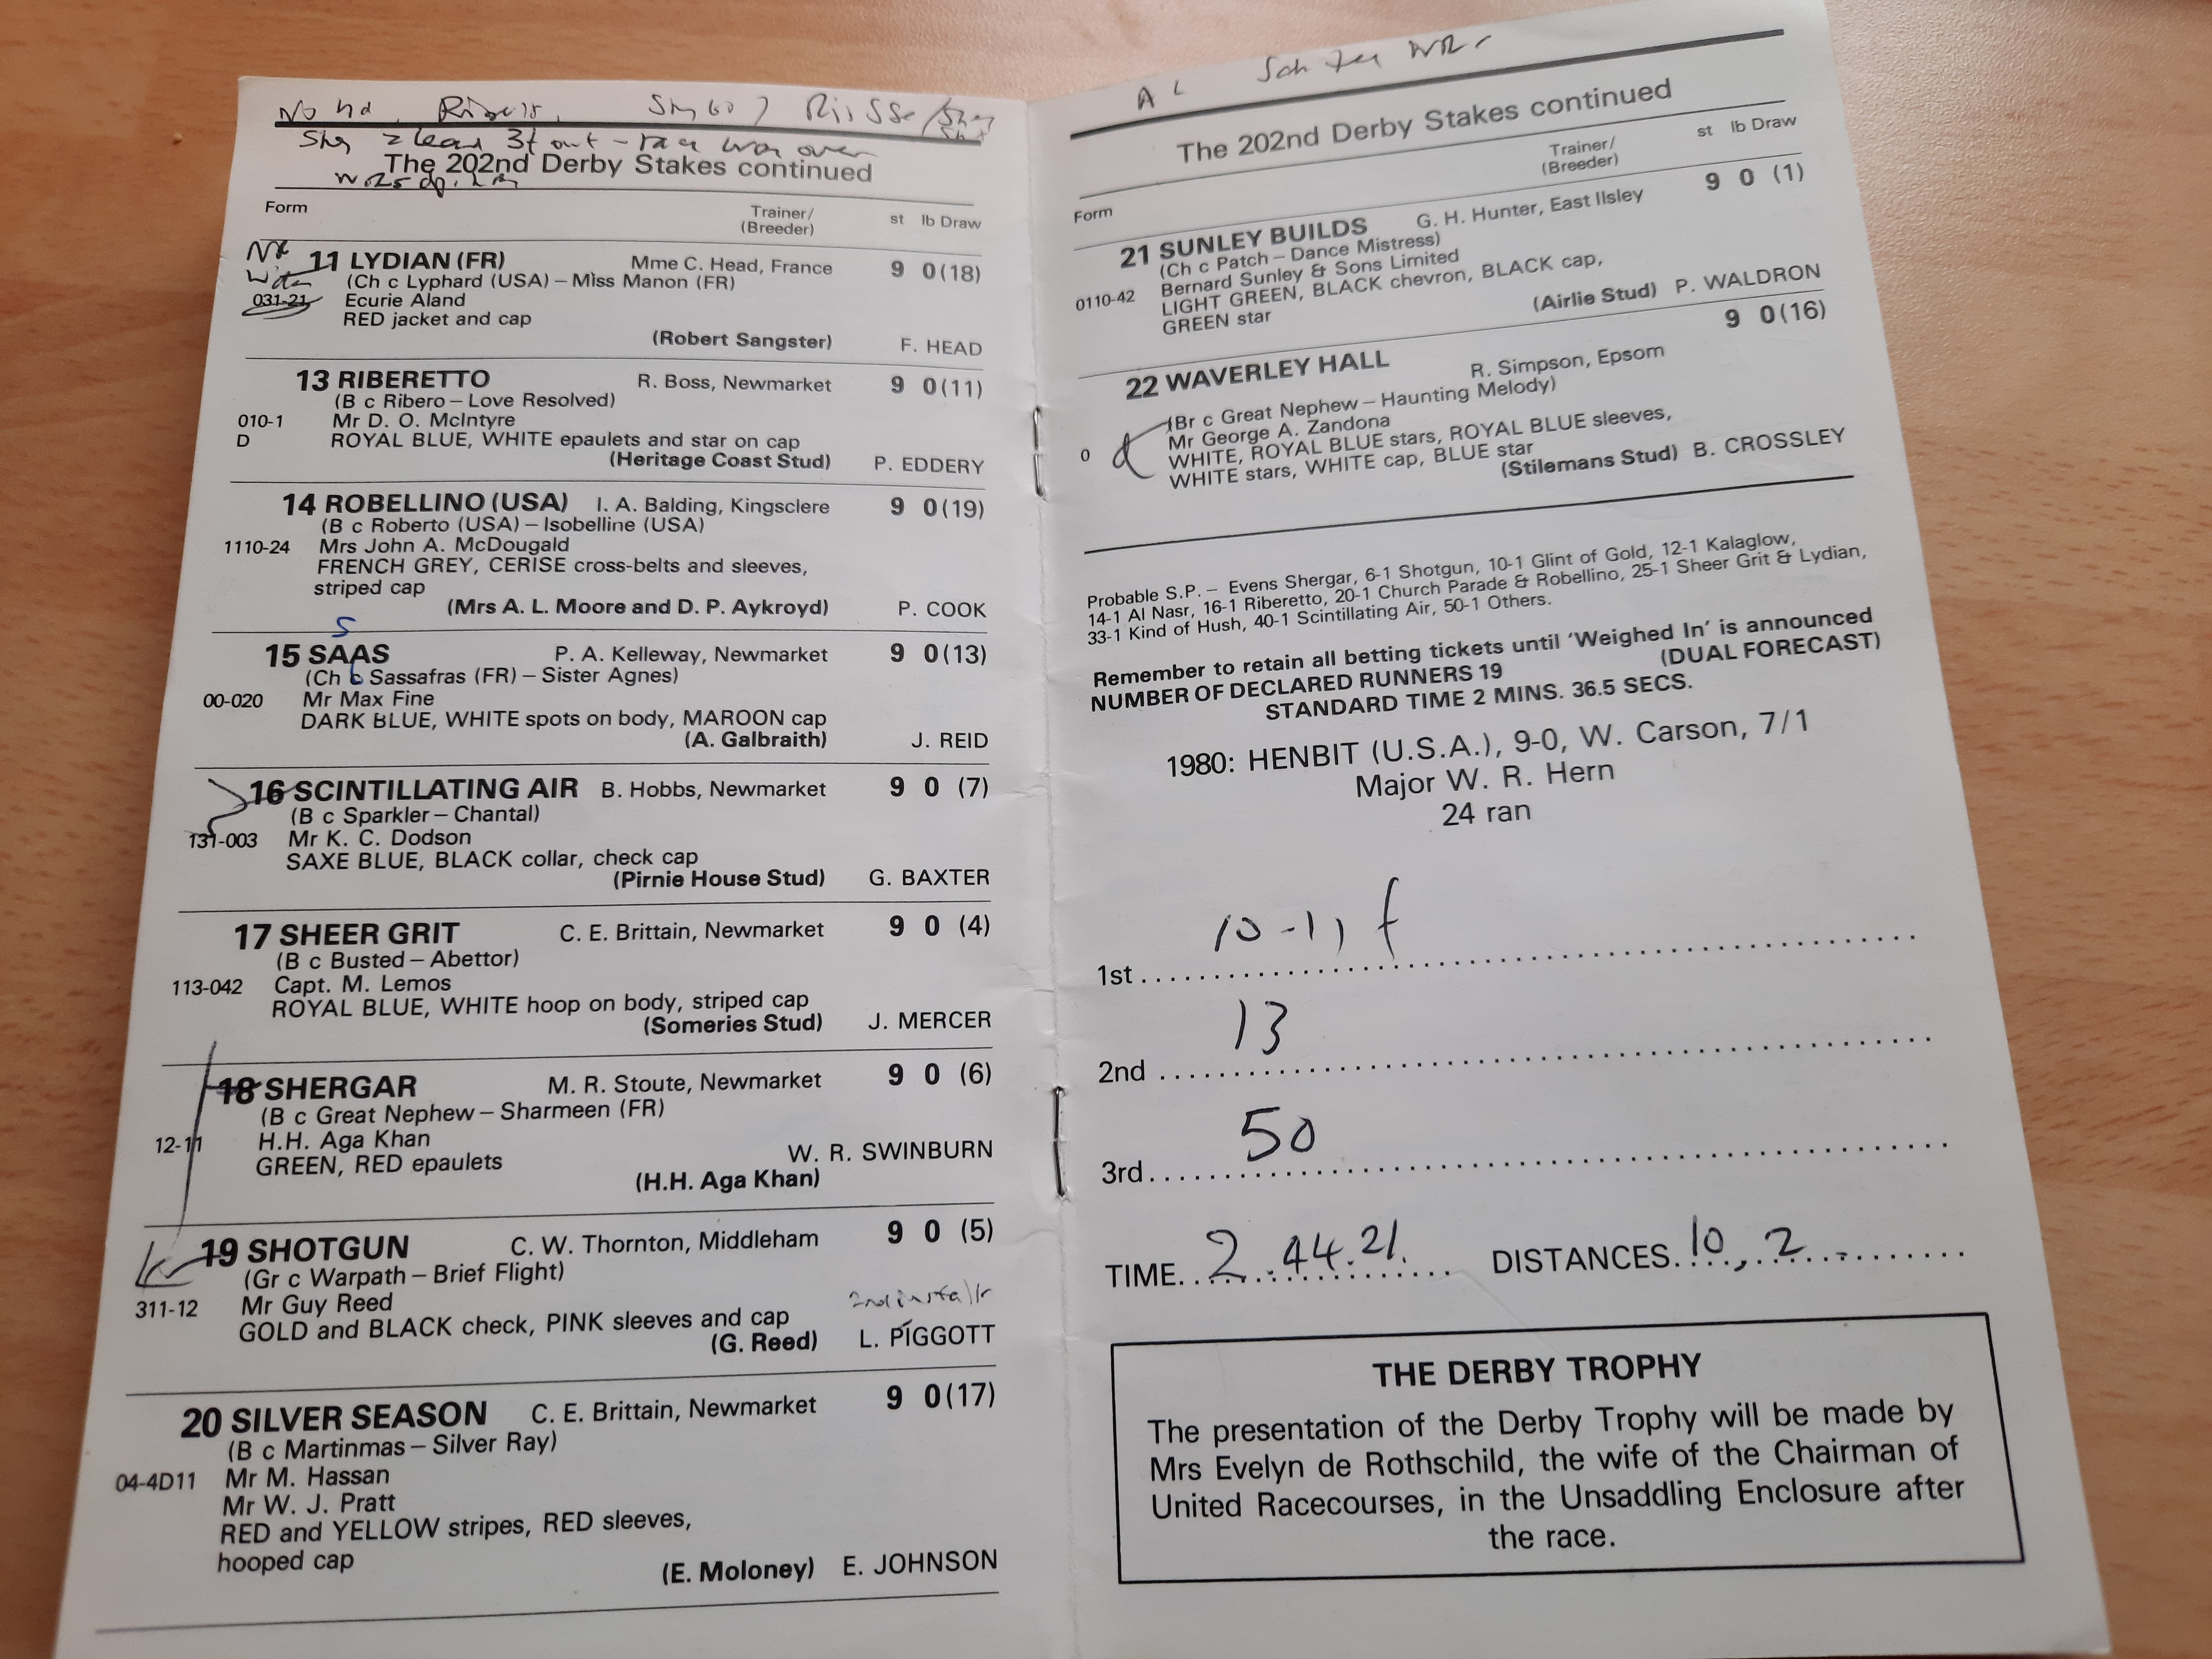 The race card for the 1981 Derby at Epsom opened on the page featuring the reference to Shergar